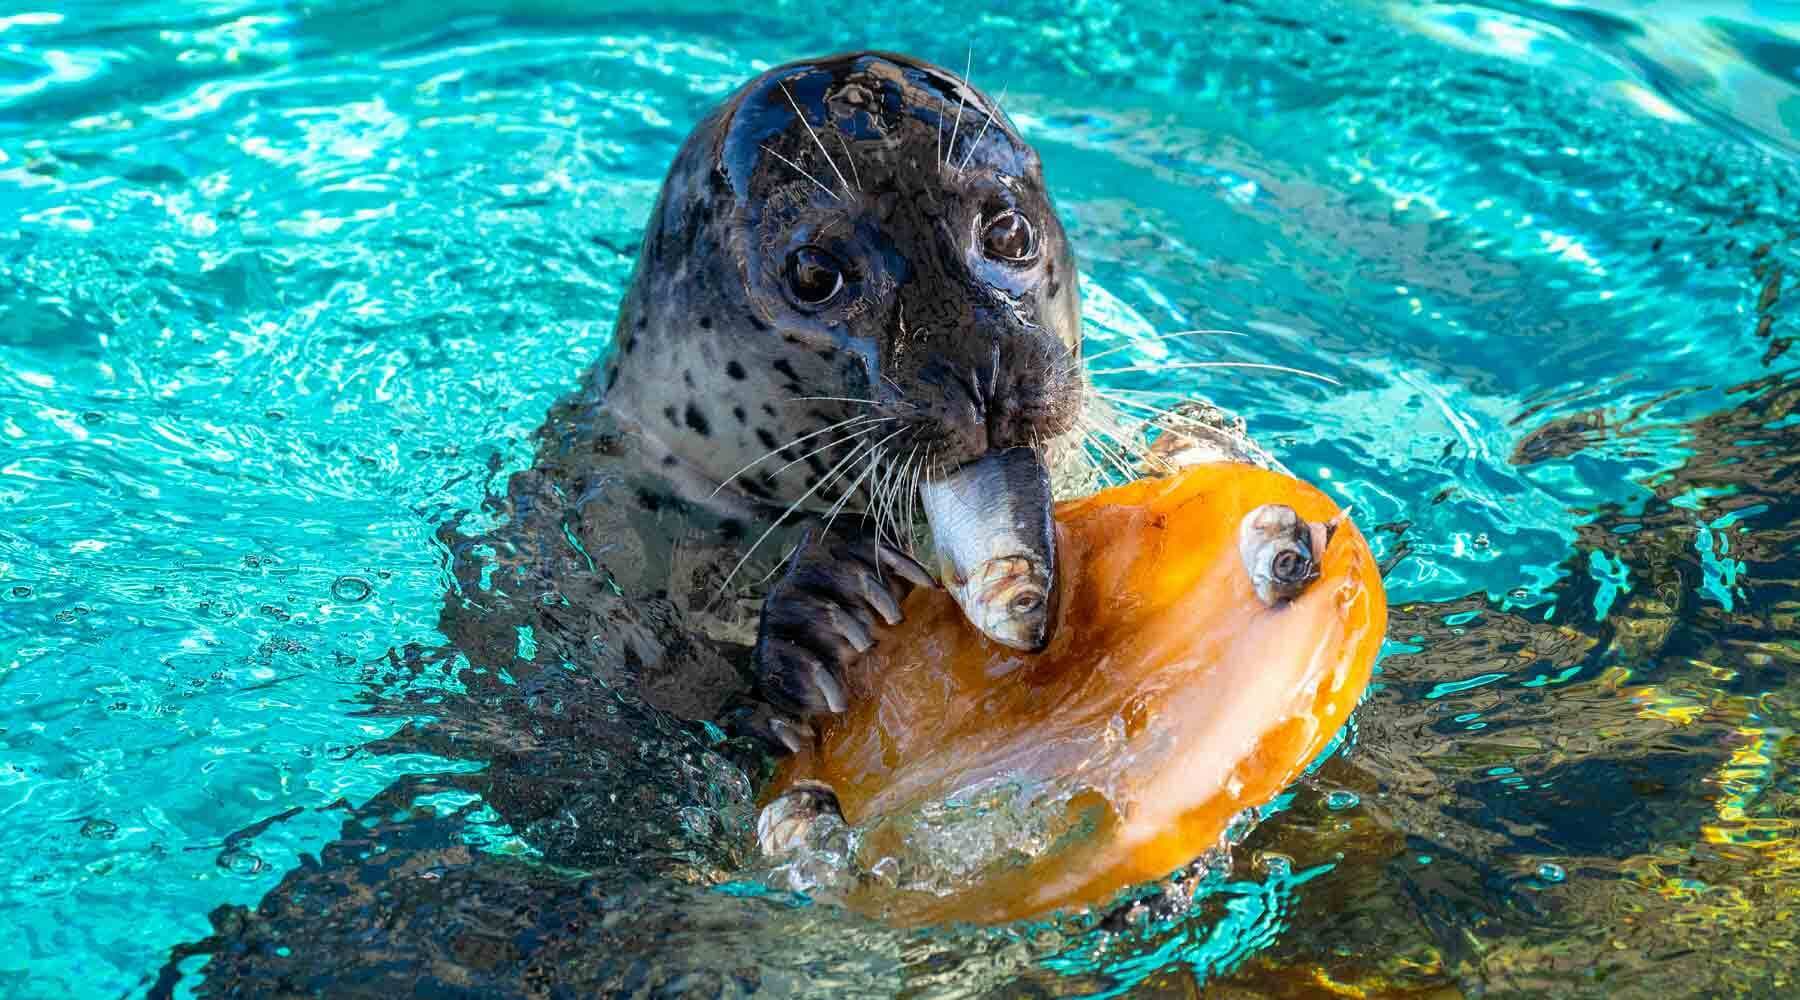 Seal with Fish in Mouth